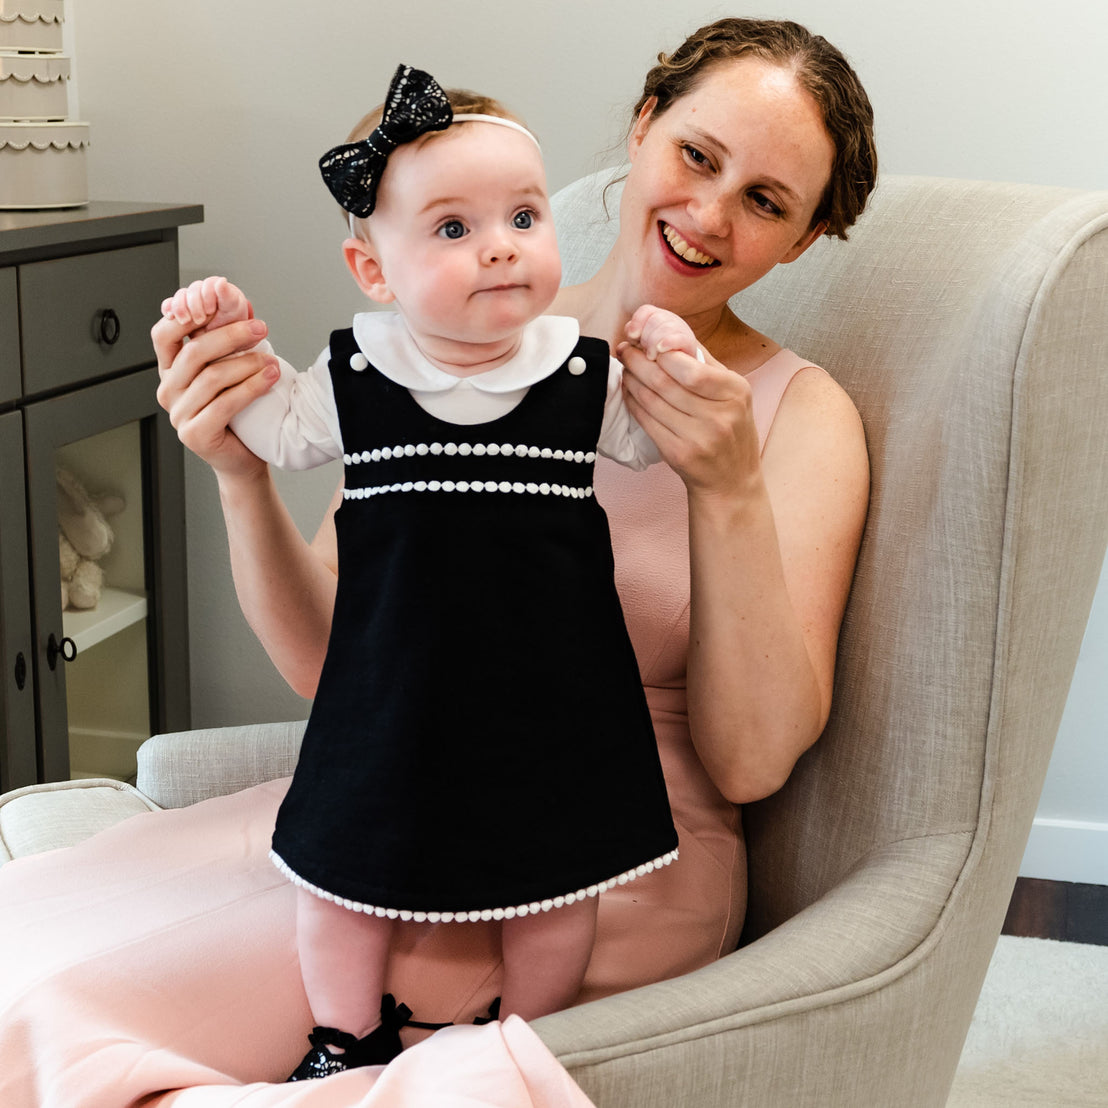 A woman in a stylish outfit smiles while sitting on a beige chair, holding a baby girl dressed in a June Jumper Dress Set with a bow headband after her christening. The baby looks surprised.